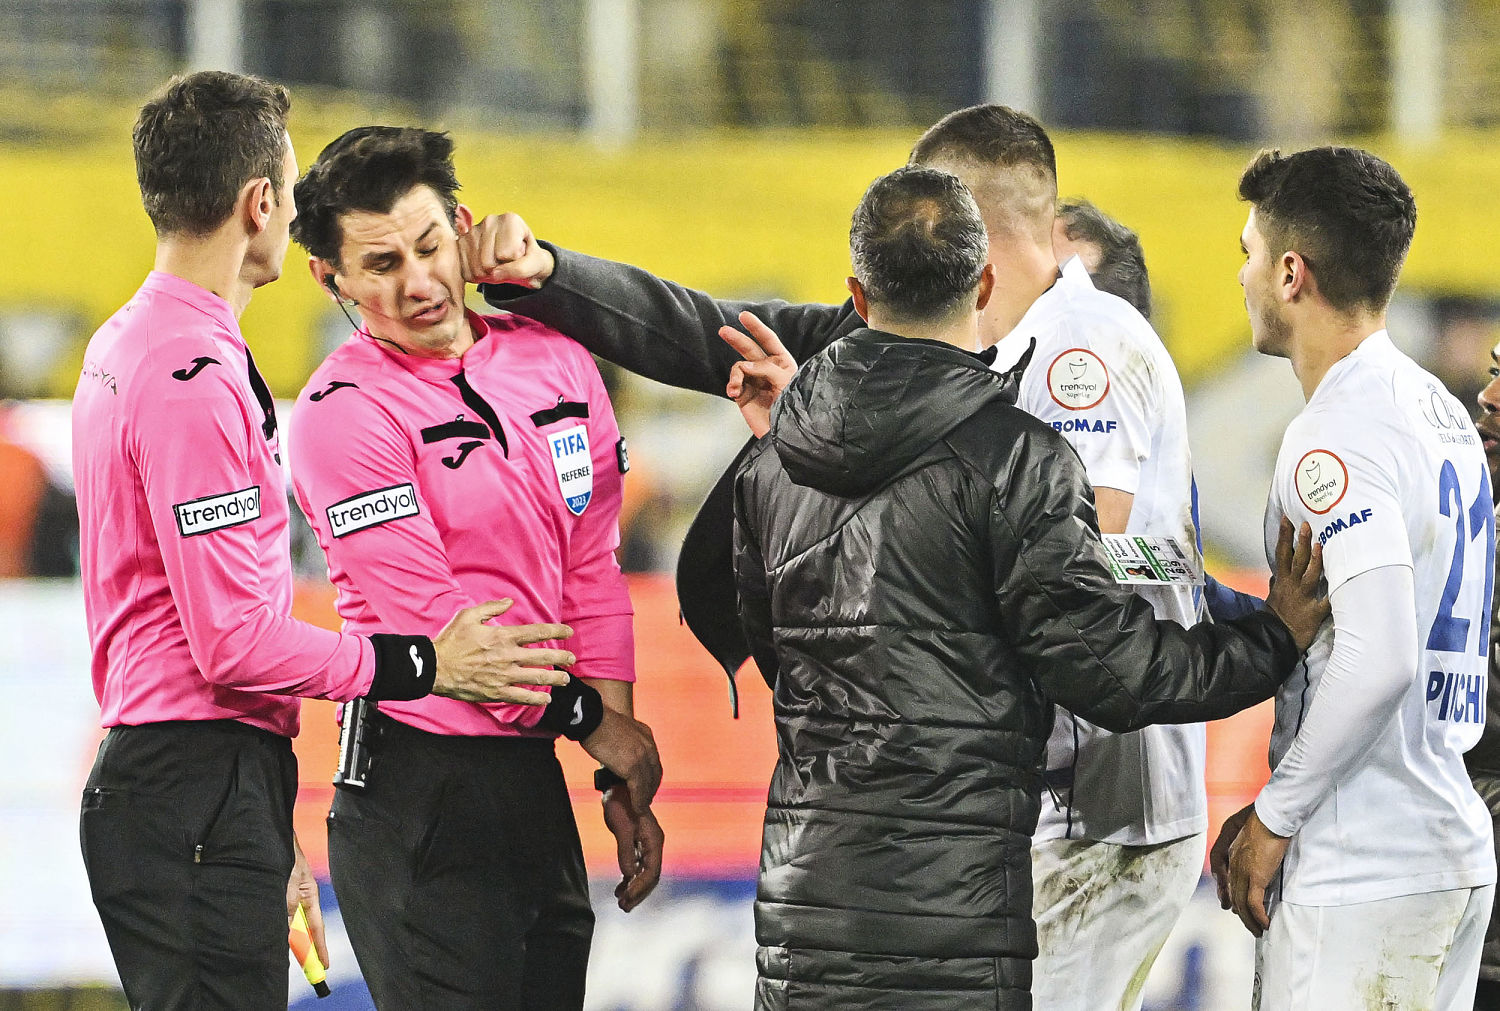 Turkey suspends all soccer games after club president punches referee at top-flight match